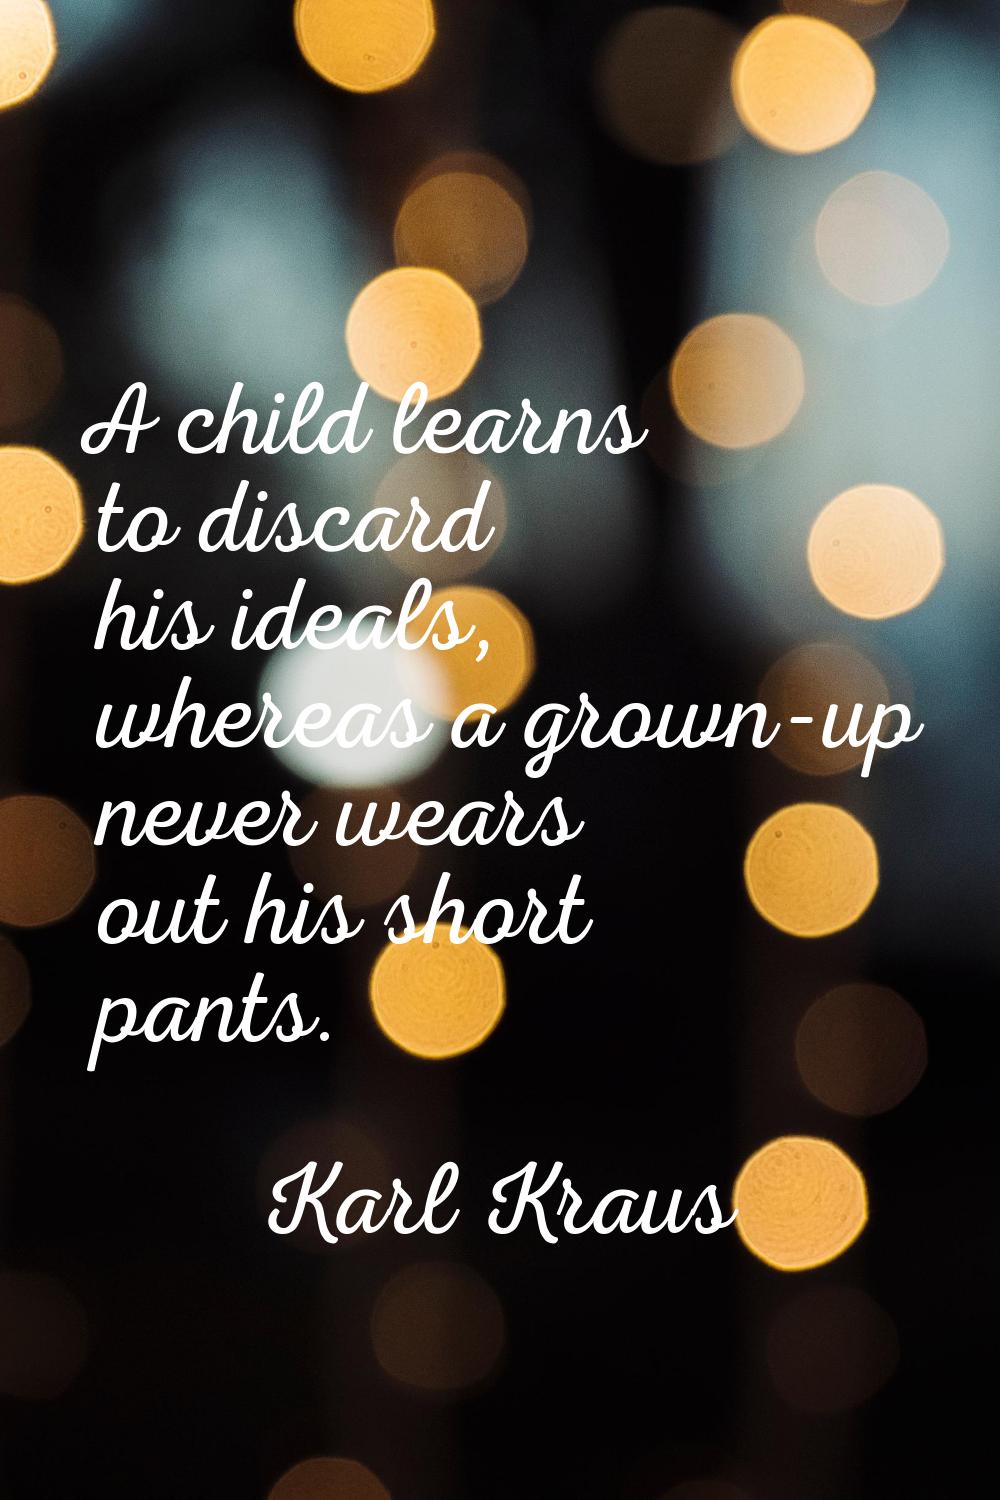 A child learns to discard his ideals, whereas a grown-up never wears out his short pants.